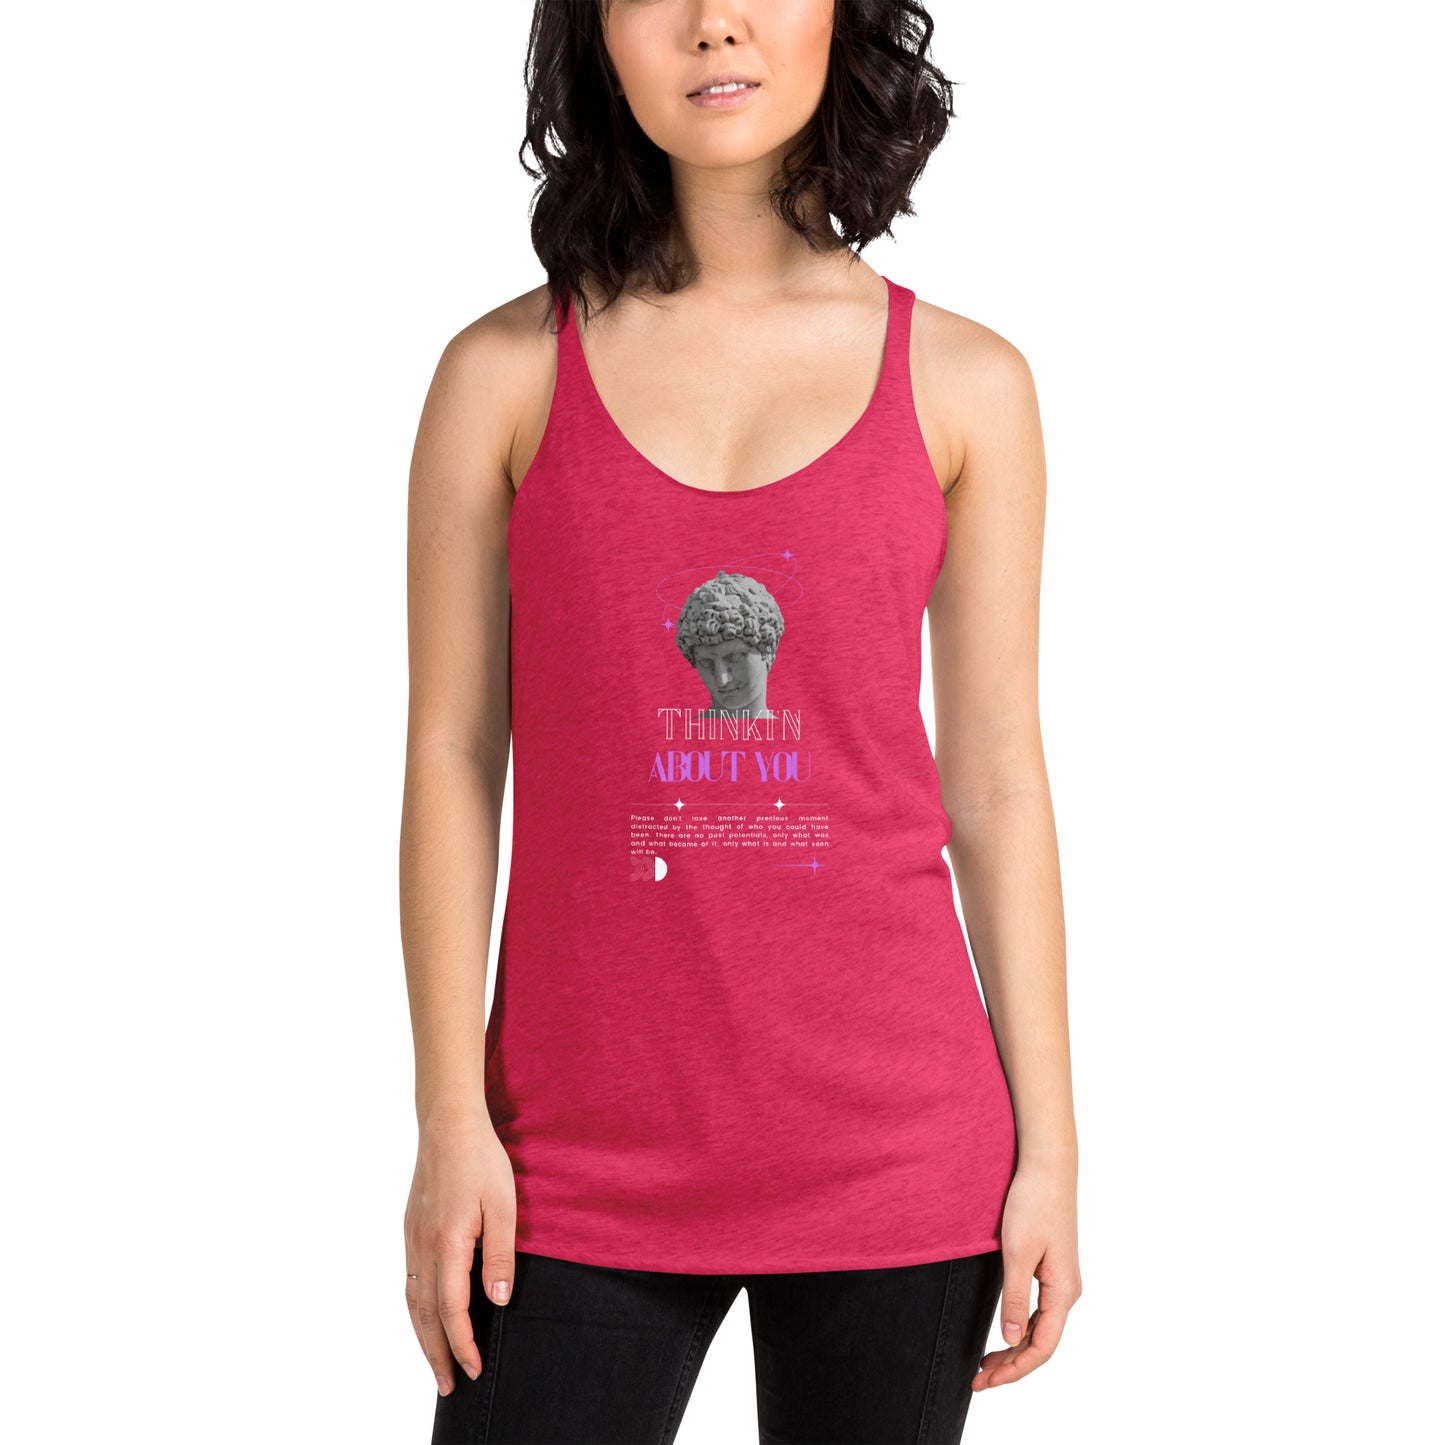 Mindfully Thinki'n About You Women's Racerback Tank